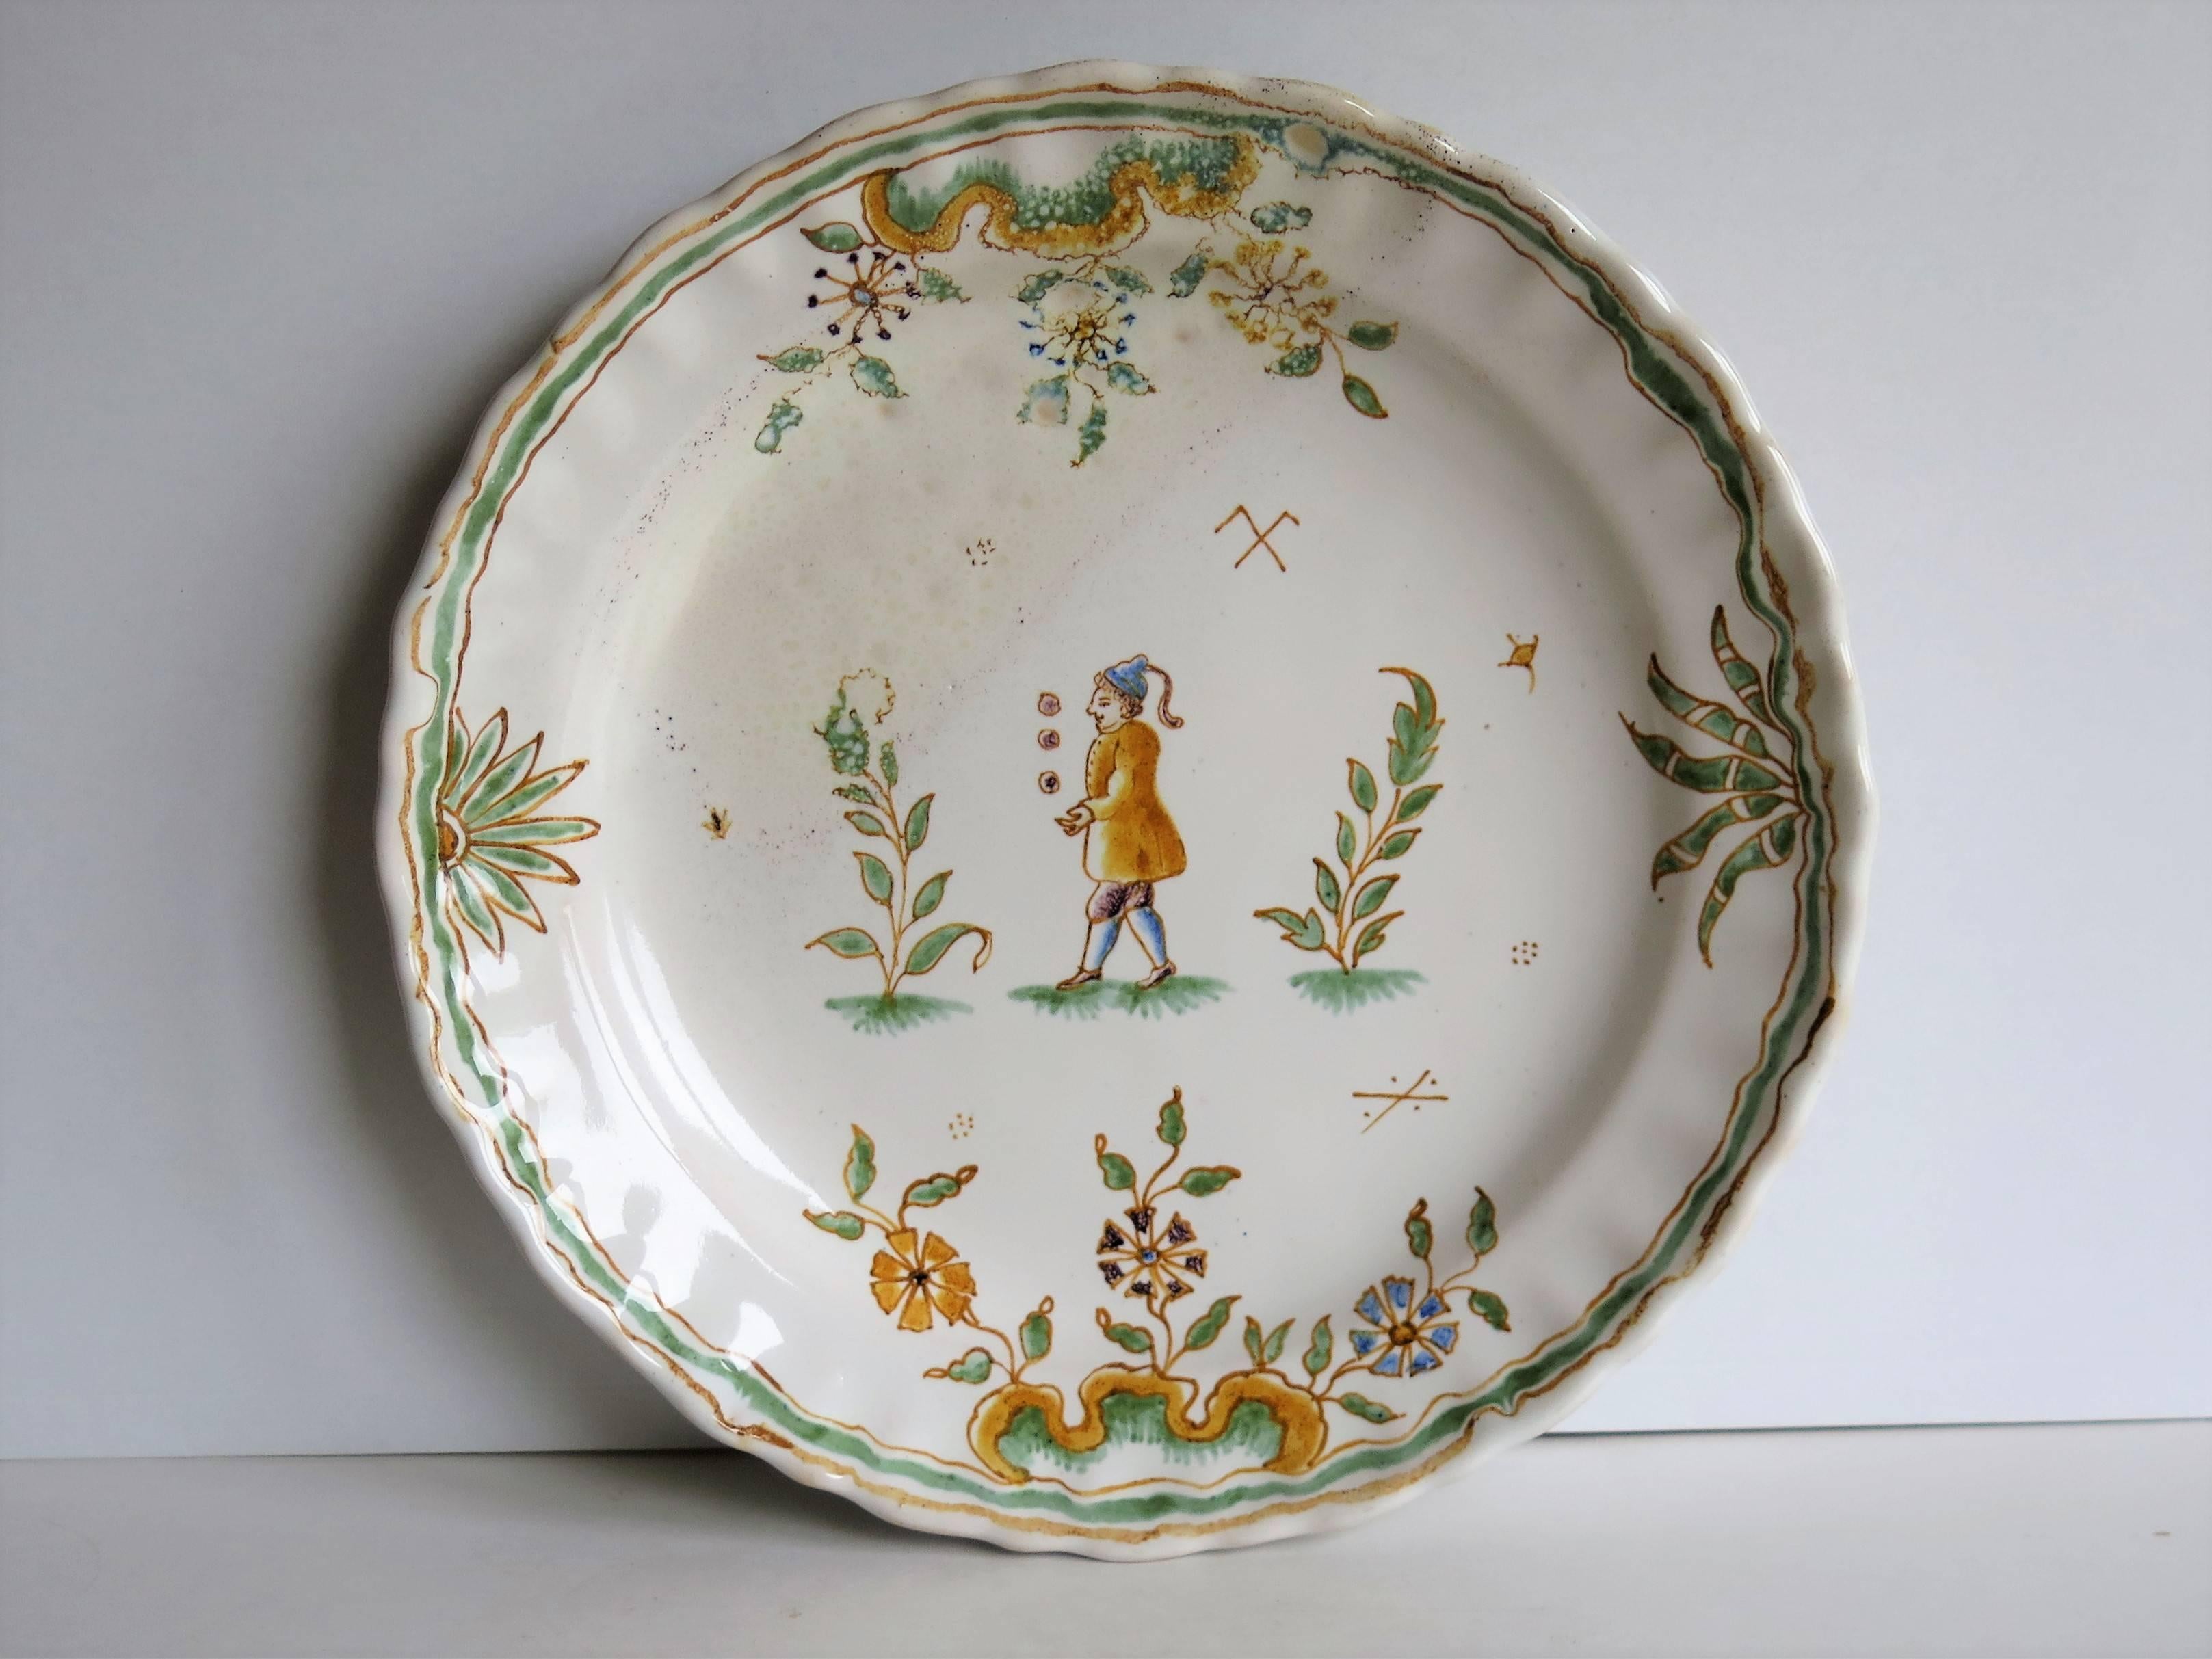 This is a good tin-glazed pottery dish or plate which we attribute to French Faience.

The dish has a wavy edge with no foot rim and is made from a pale buff / grey earthenware.

It is decorated in a simple country style, all hand-painted in a